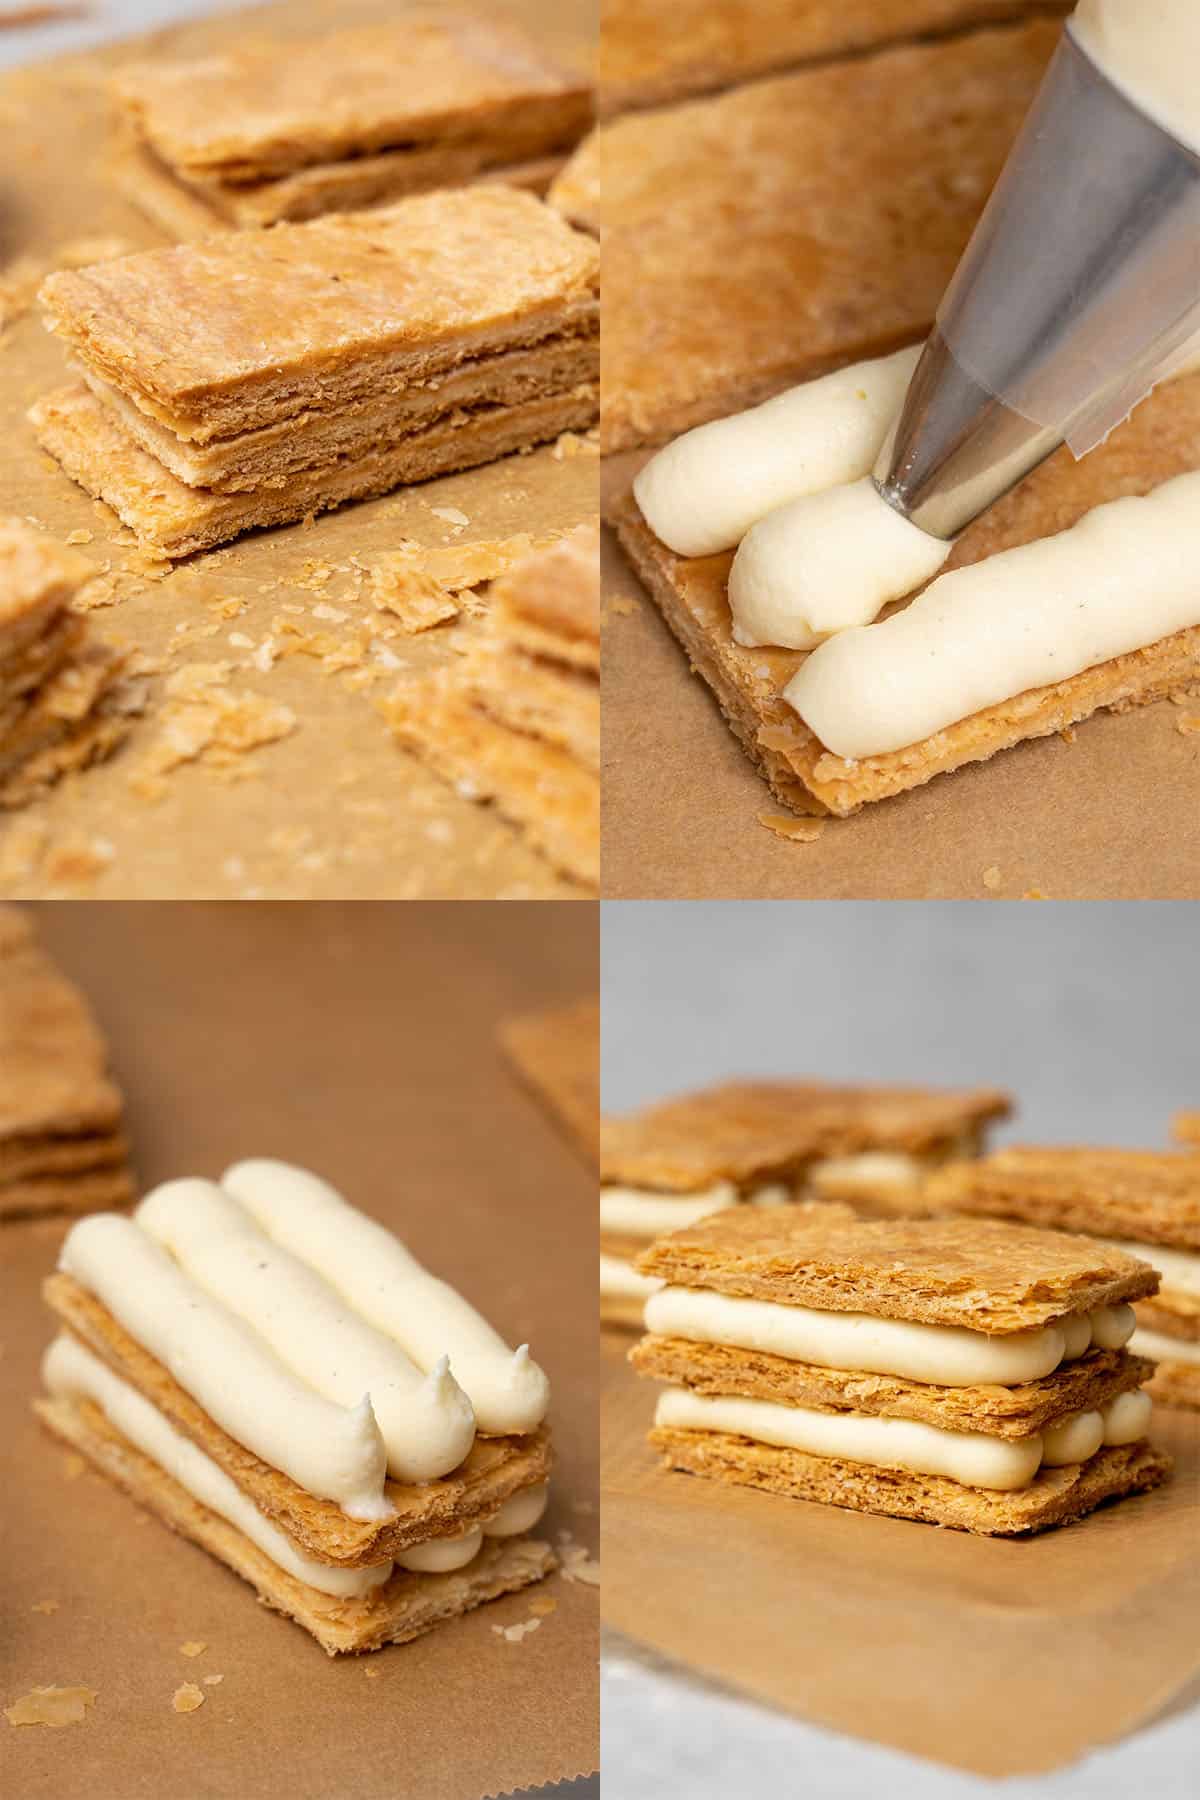 Mille feuille assembly process.